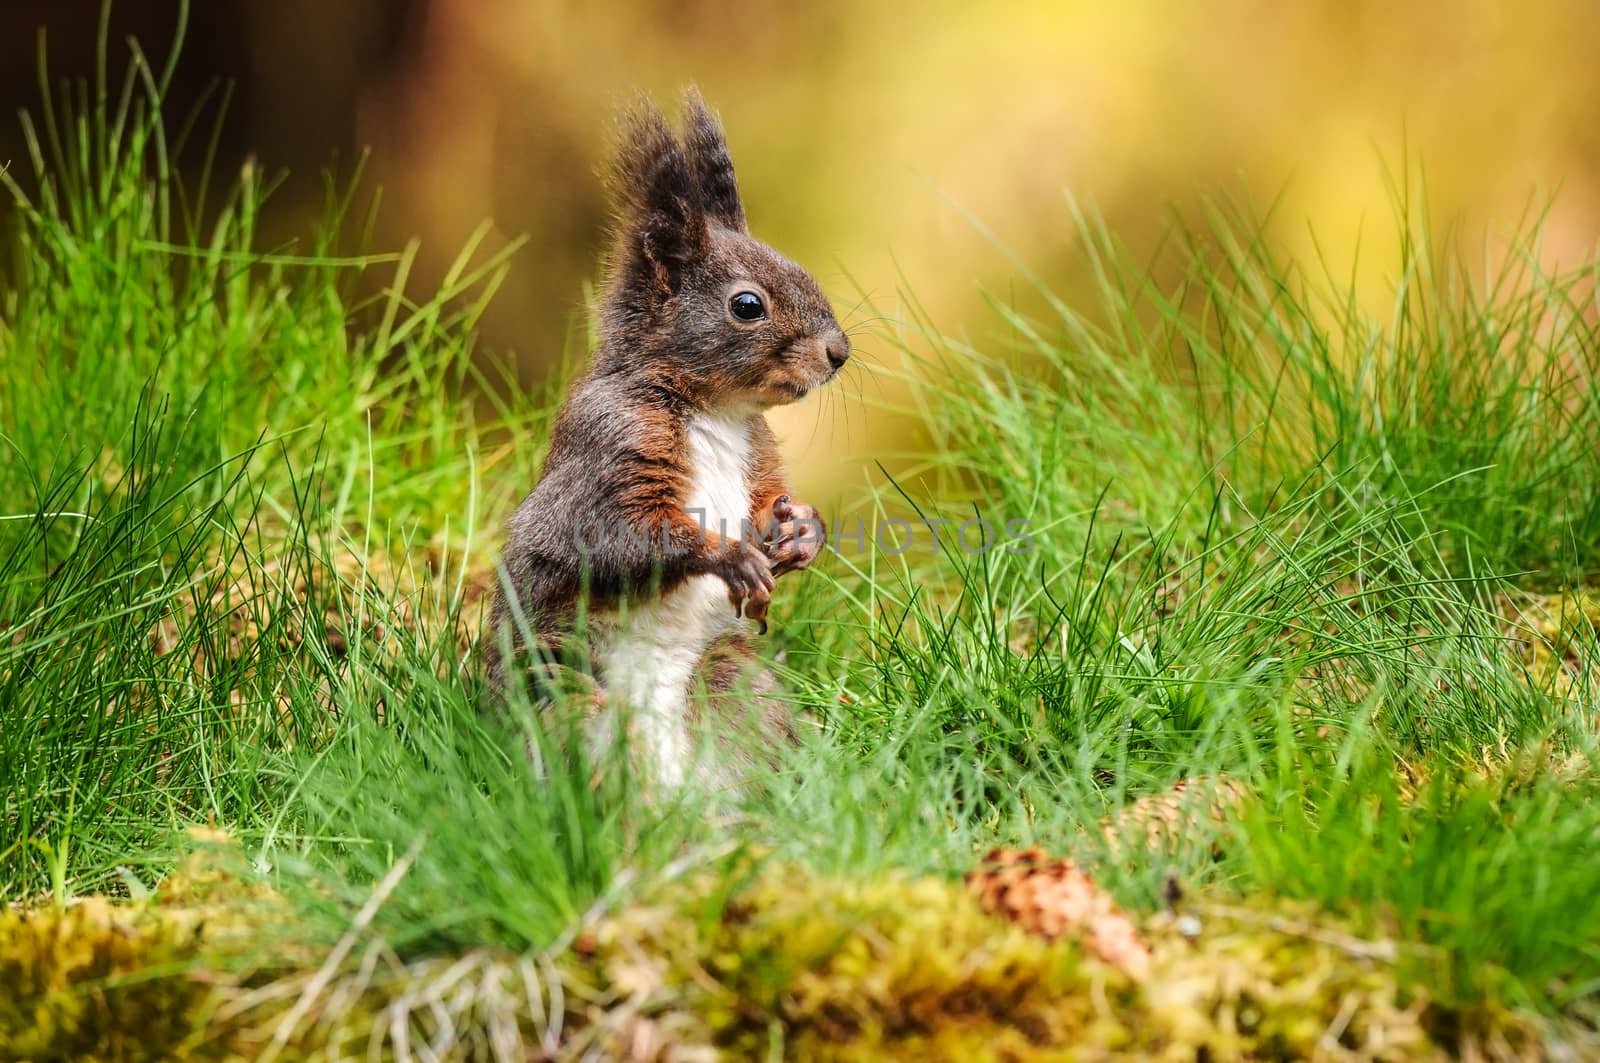 Eurasian red squirrel (Sciurus vulgaris) sitting in fresh green grass with moss and conifer cones in foreground and blurred forest in back.